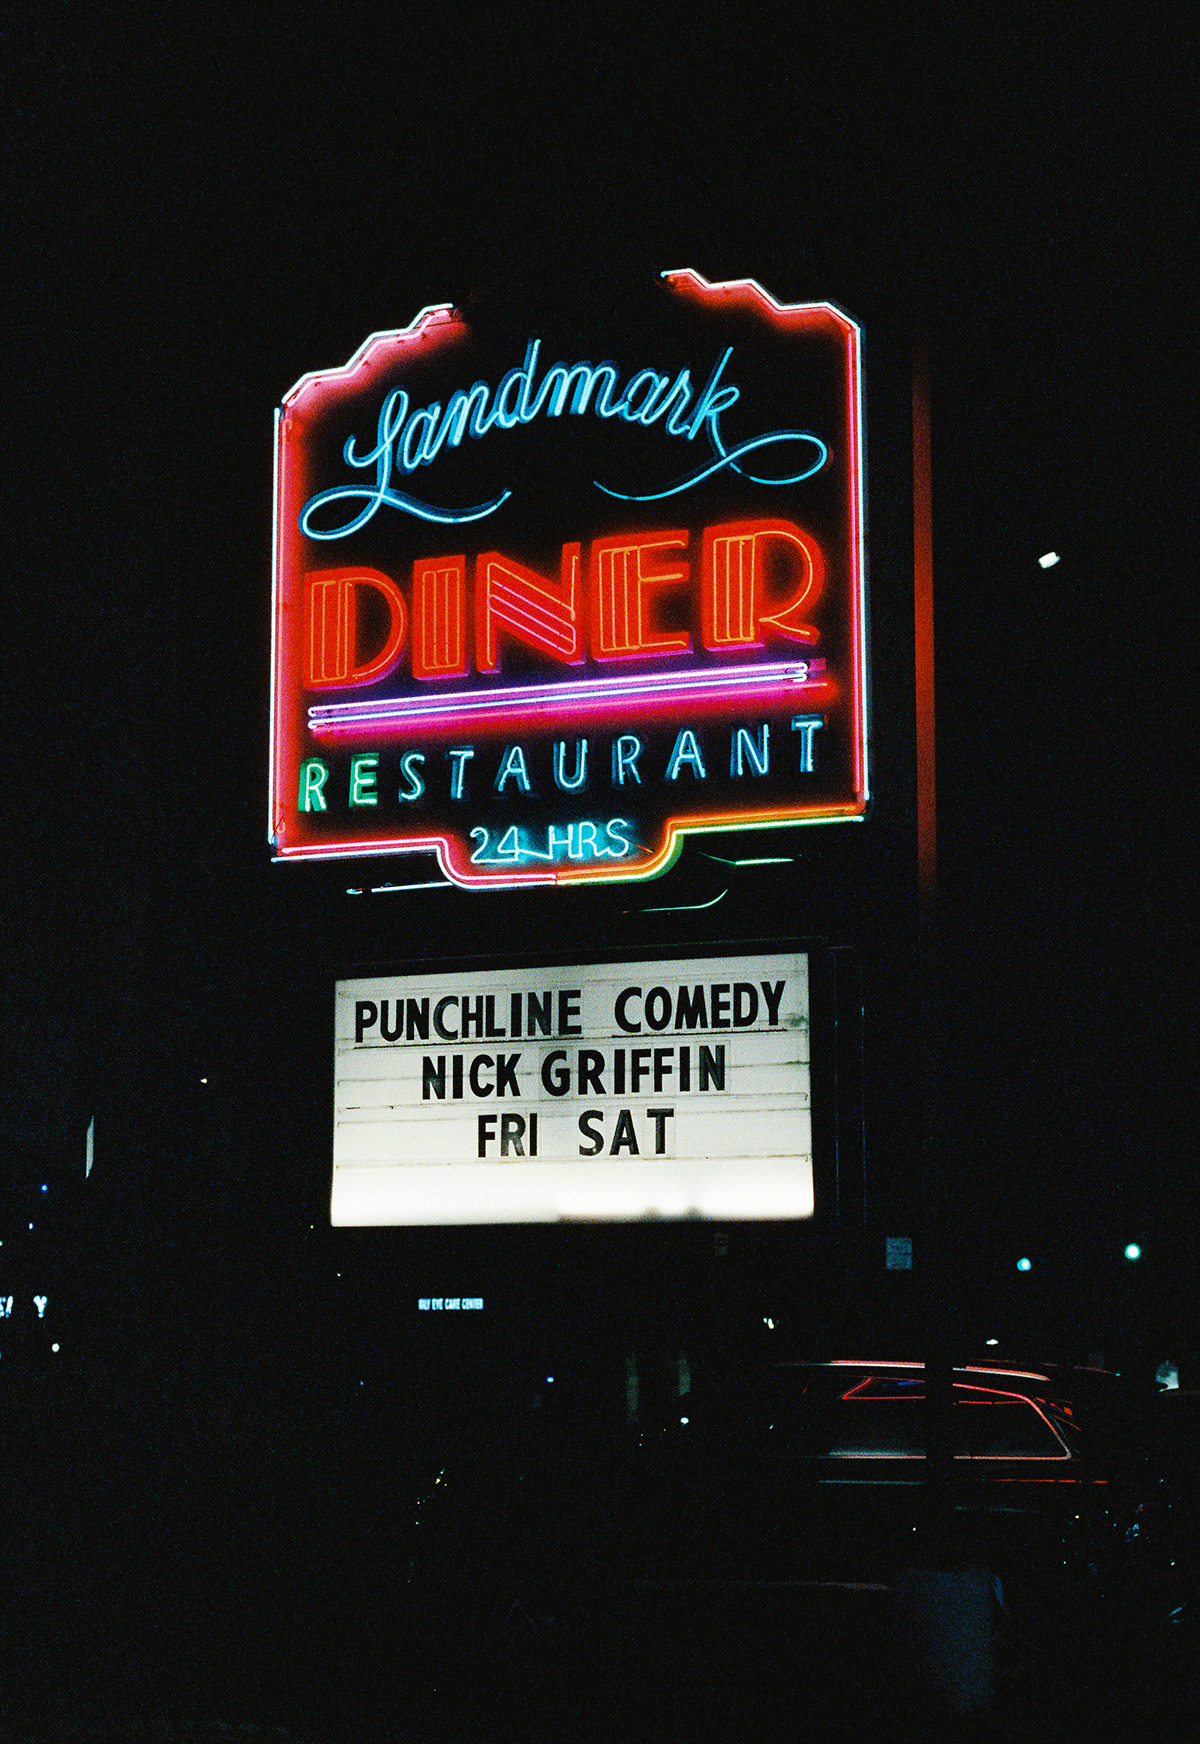 film photography diner neon Photography  Film   analog 35mm kodak analog photography 35mm film